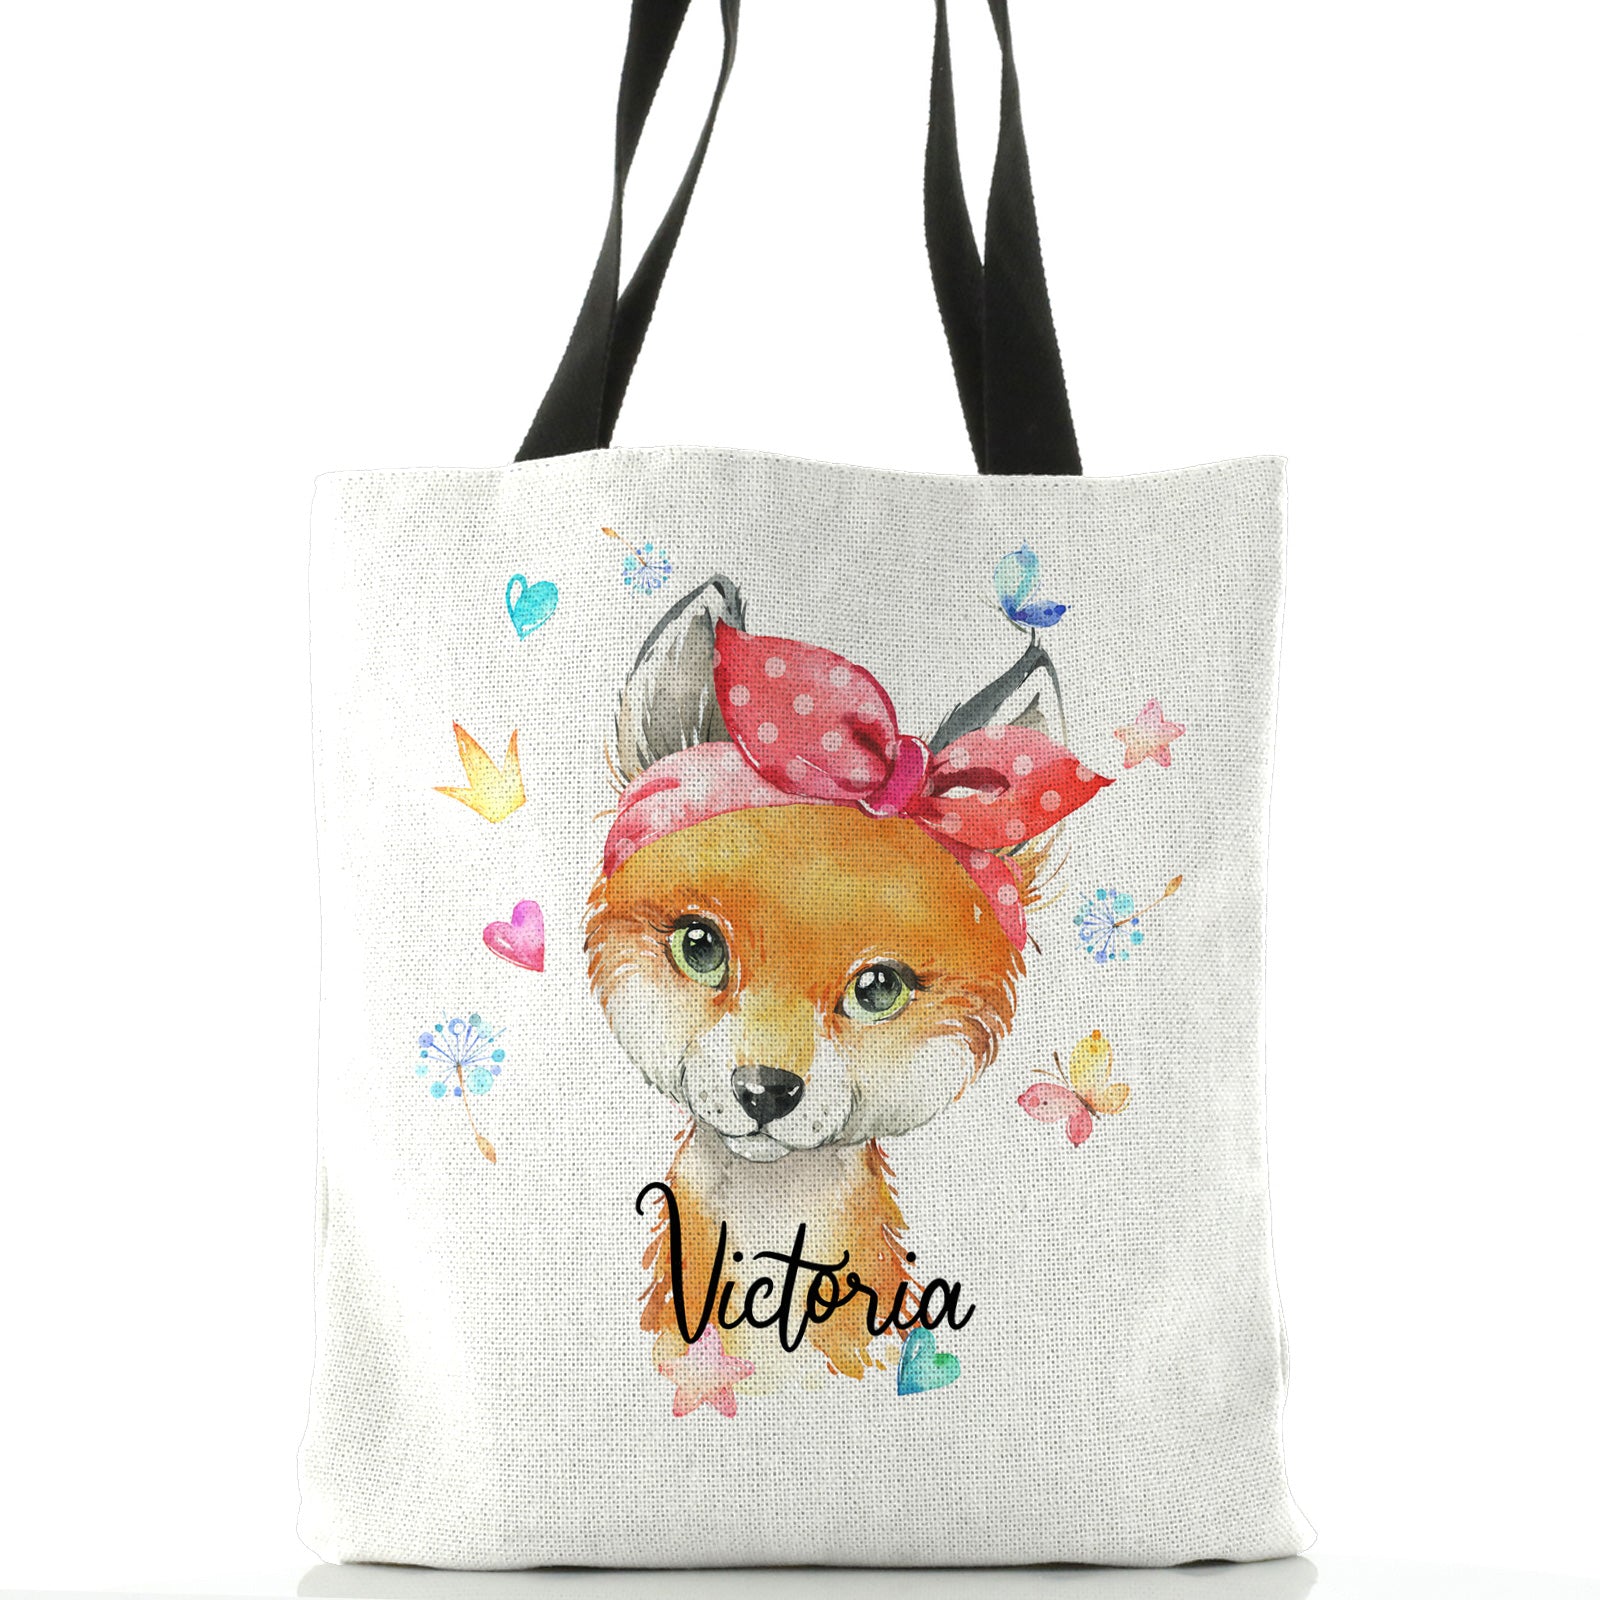 Personalised White Tote Bag with Red Fox with Hearts Dandelion Butterflies and Cute Text